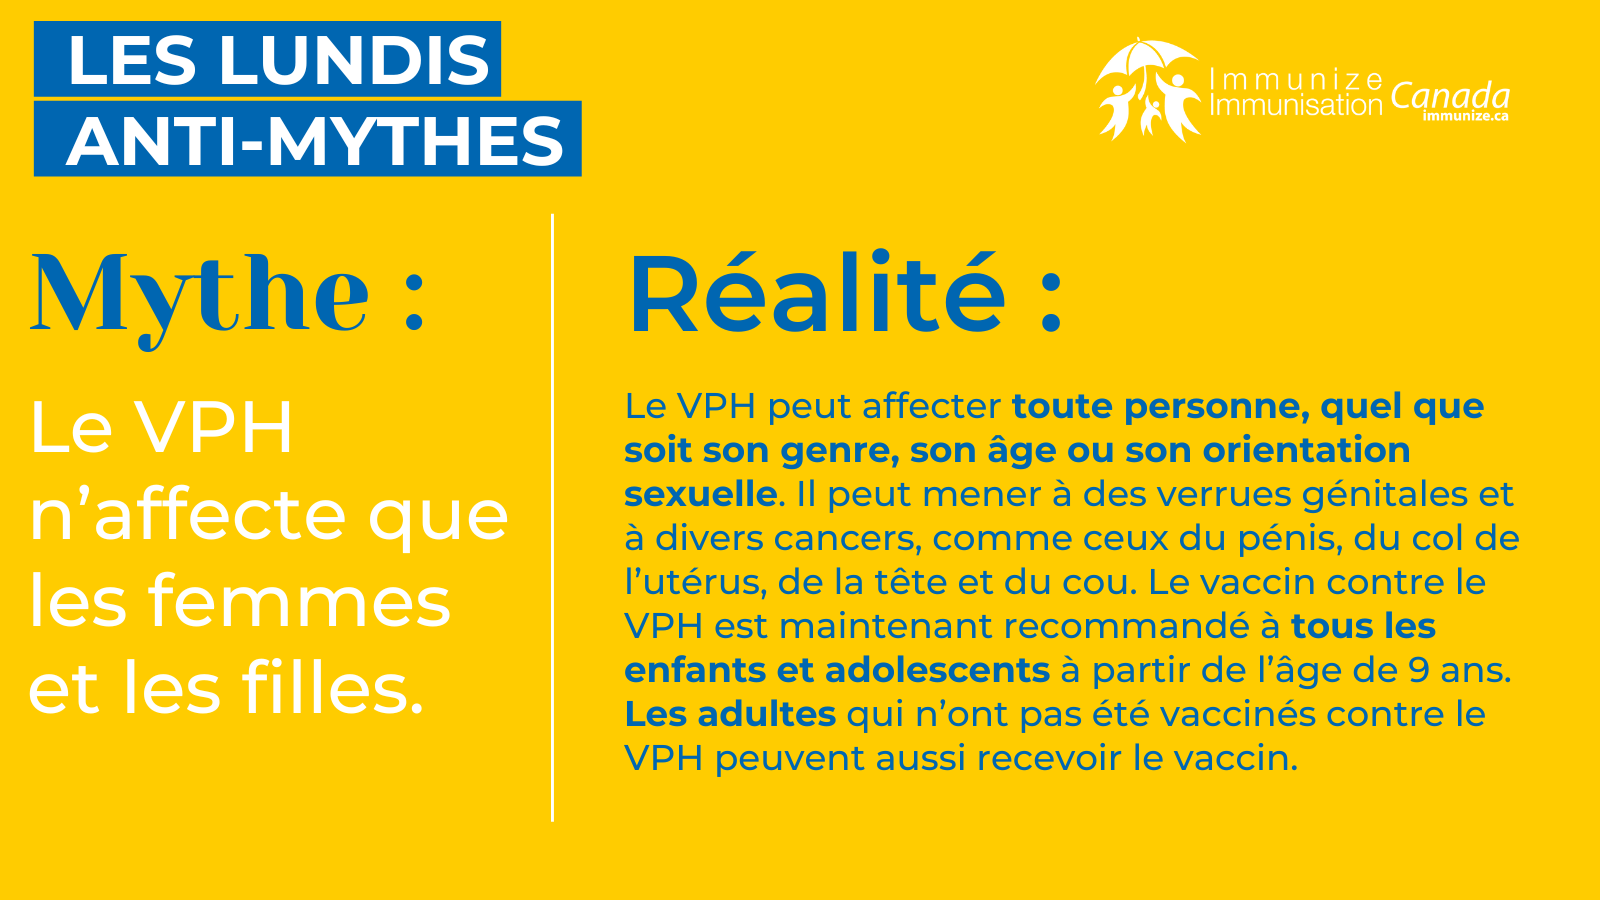 Lundis anti-mythes - image 3 pour Twitter